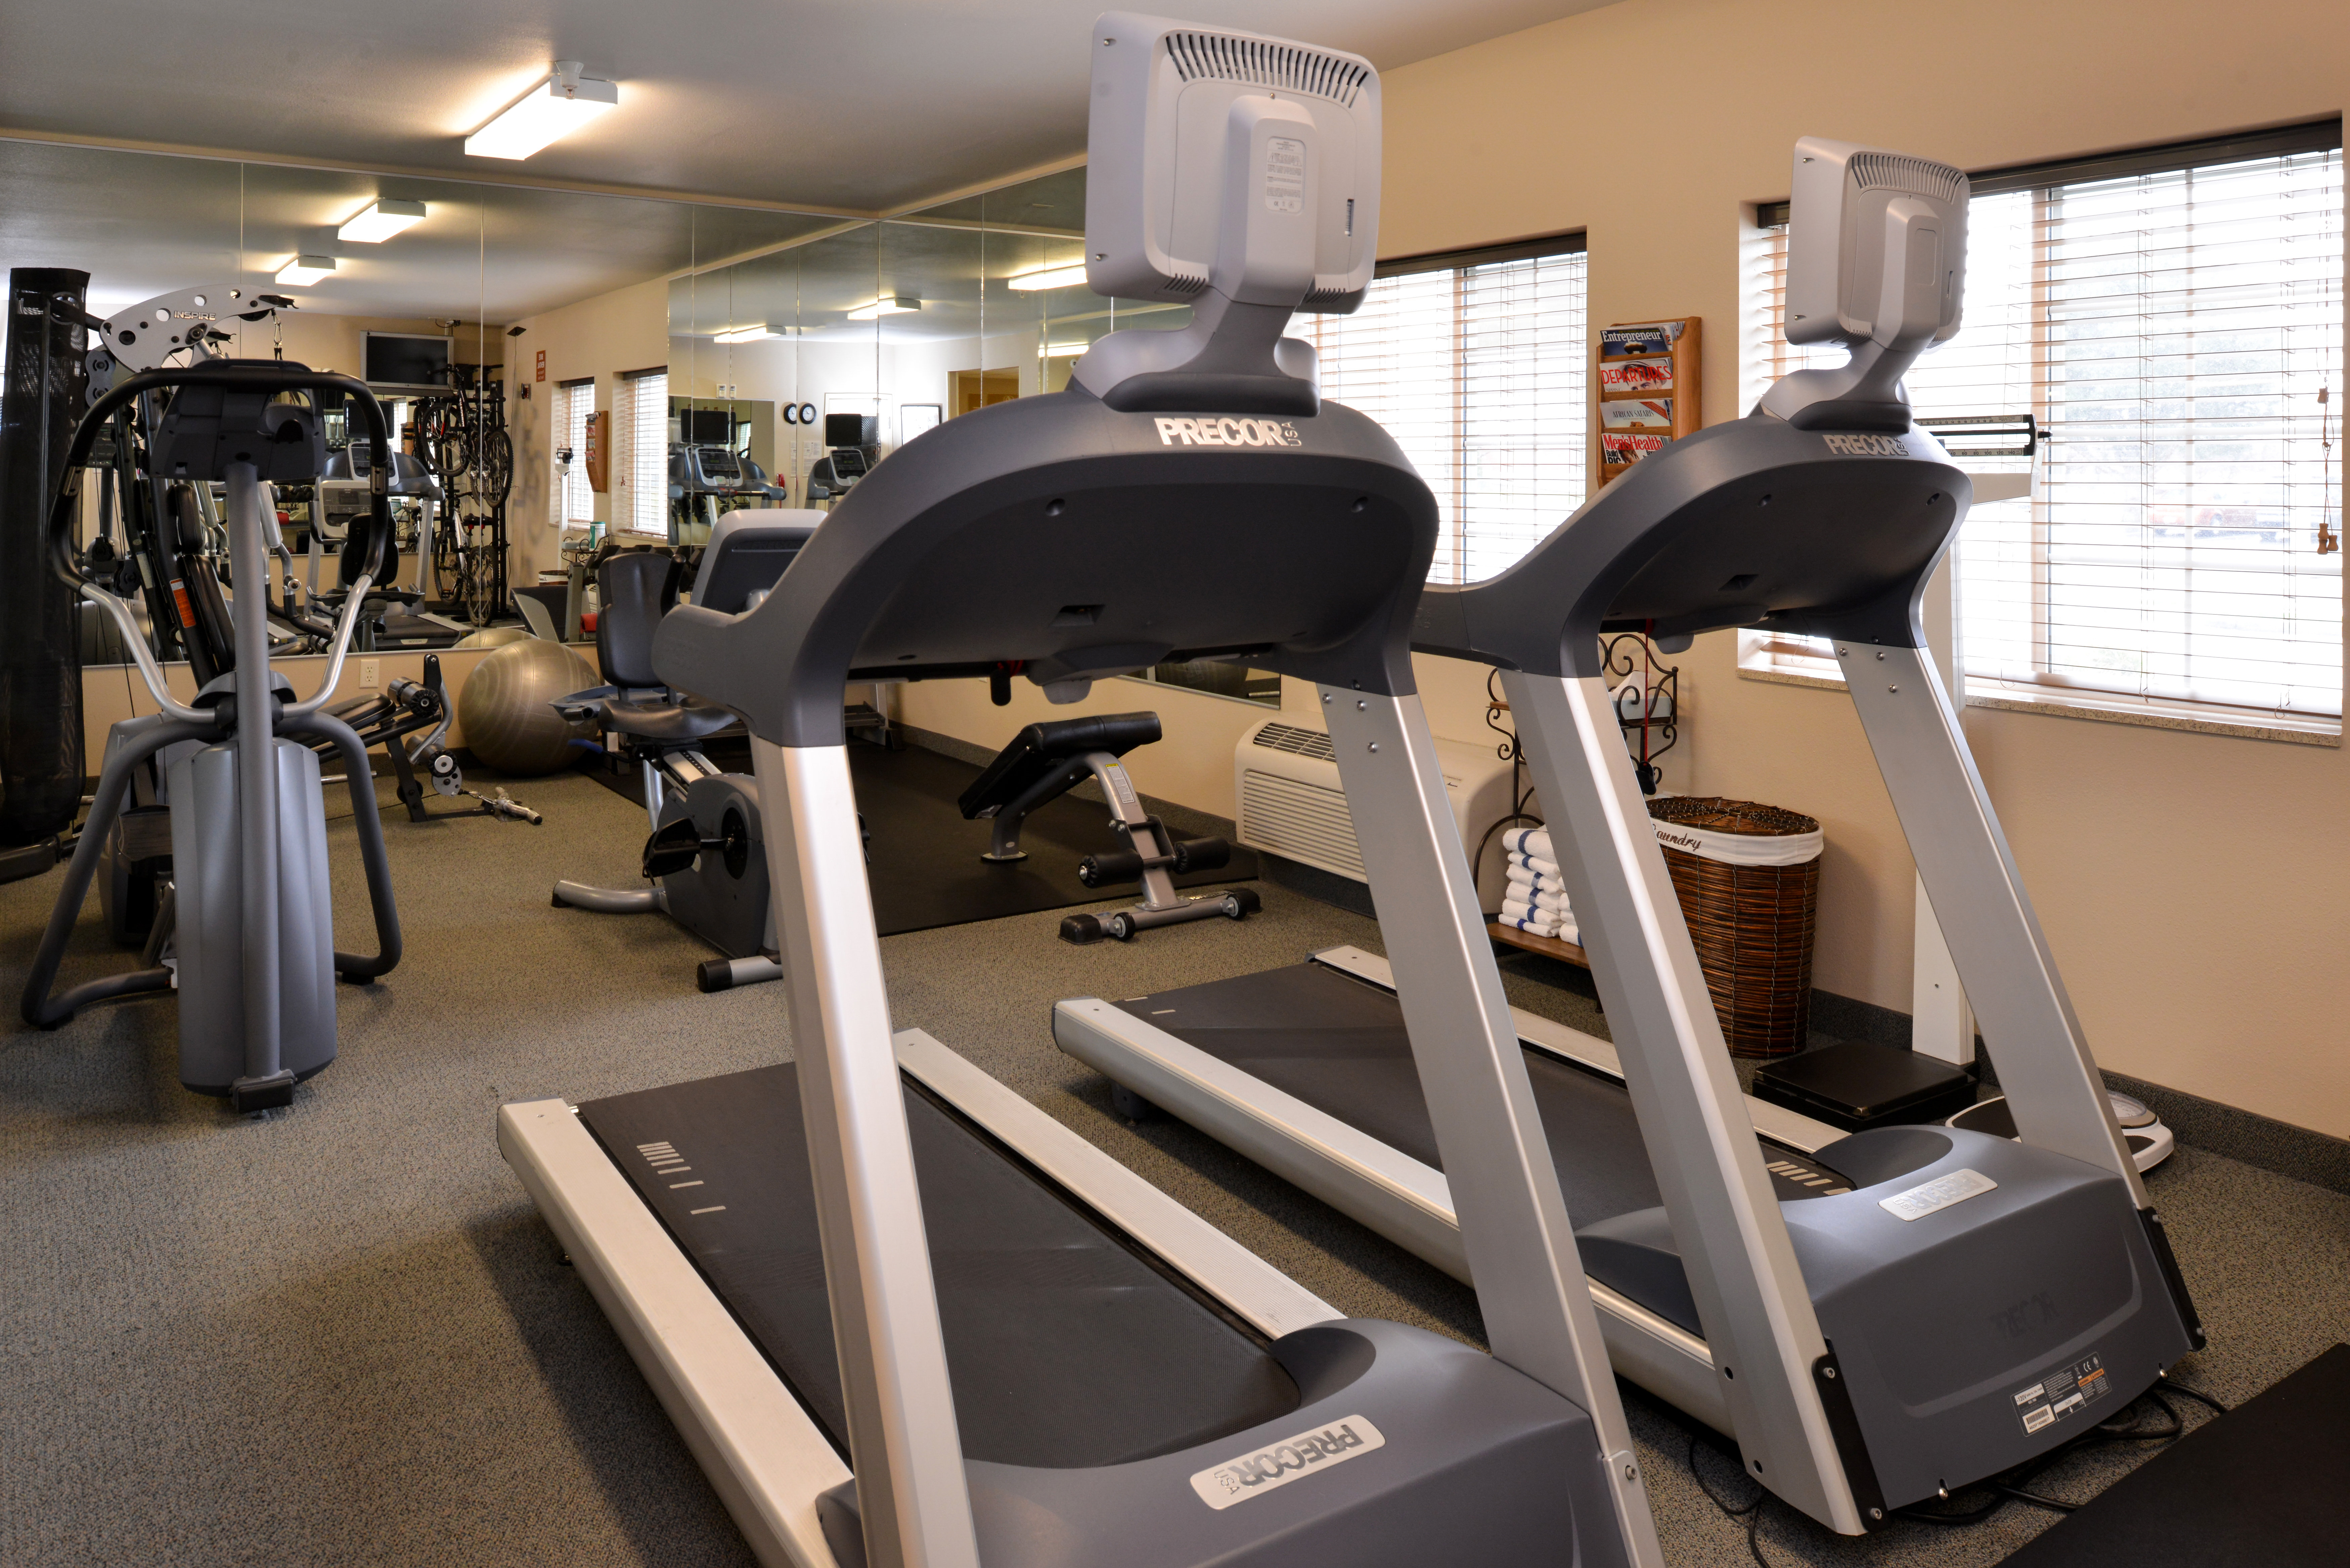 Fully equipped gym, making easy to stay fit on the road.